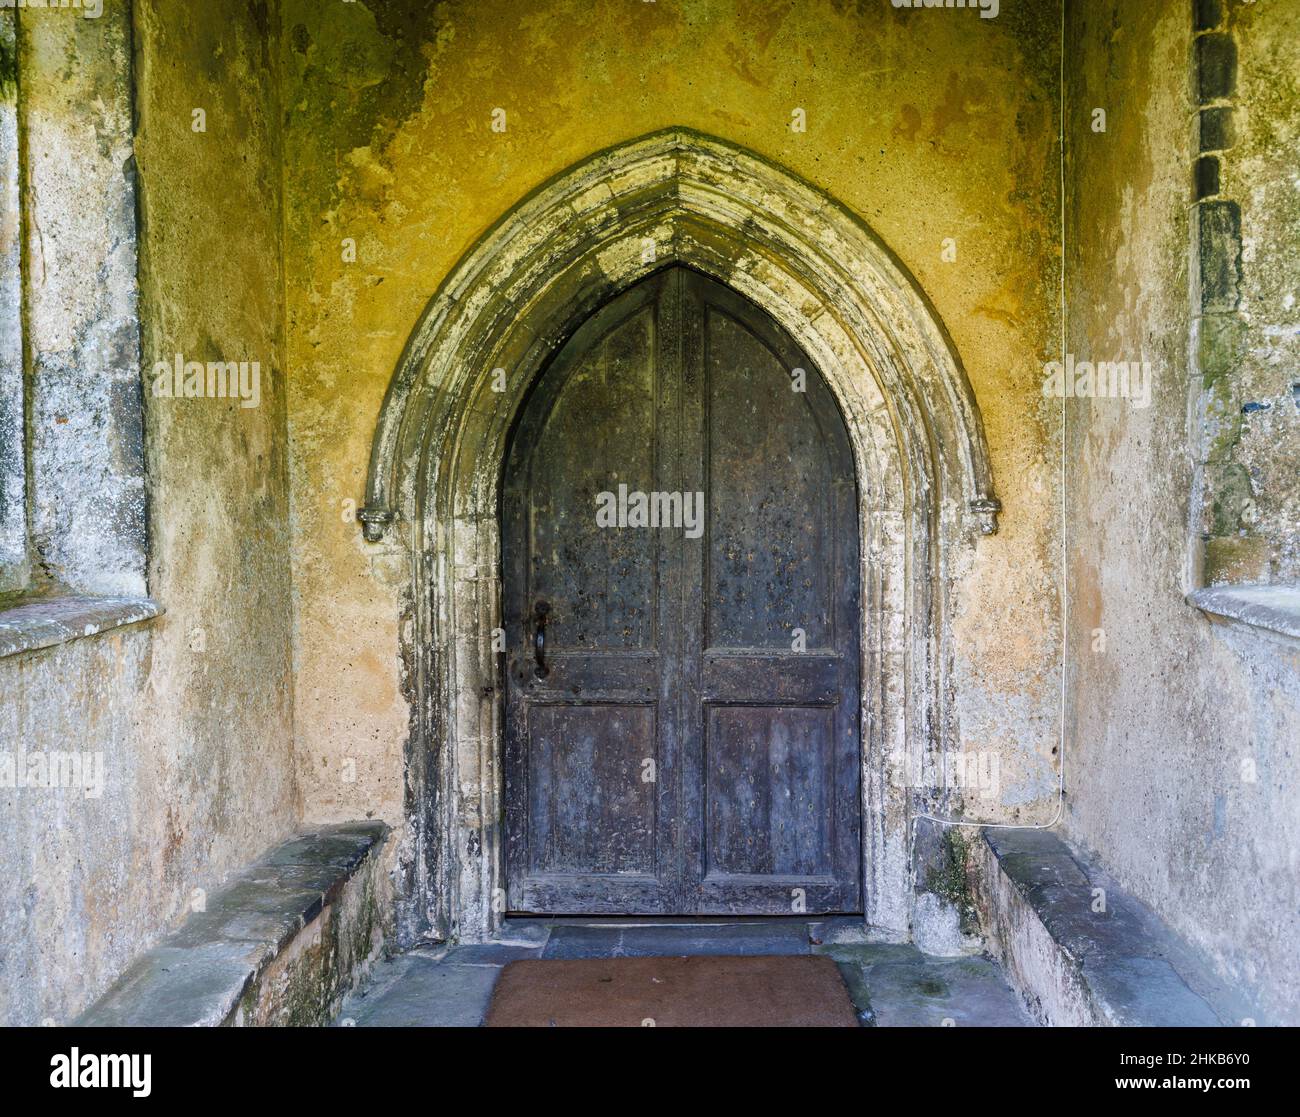 Wooden entrance door to St Margaret's Church, Cley-Next-The-Sea, a coastal village in Norfolk, East Anglia, England Stock Photo